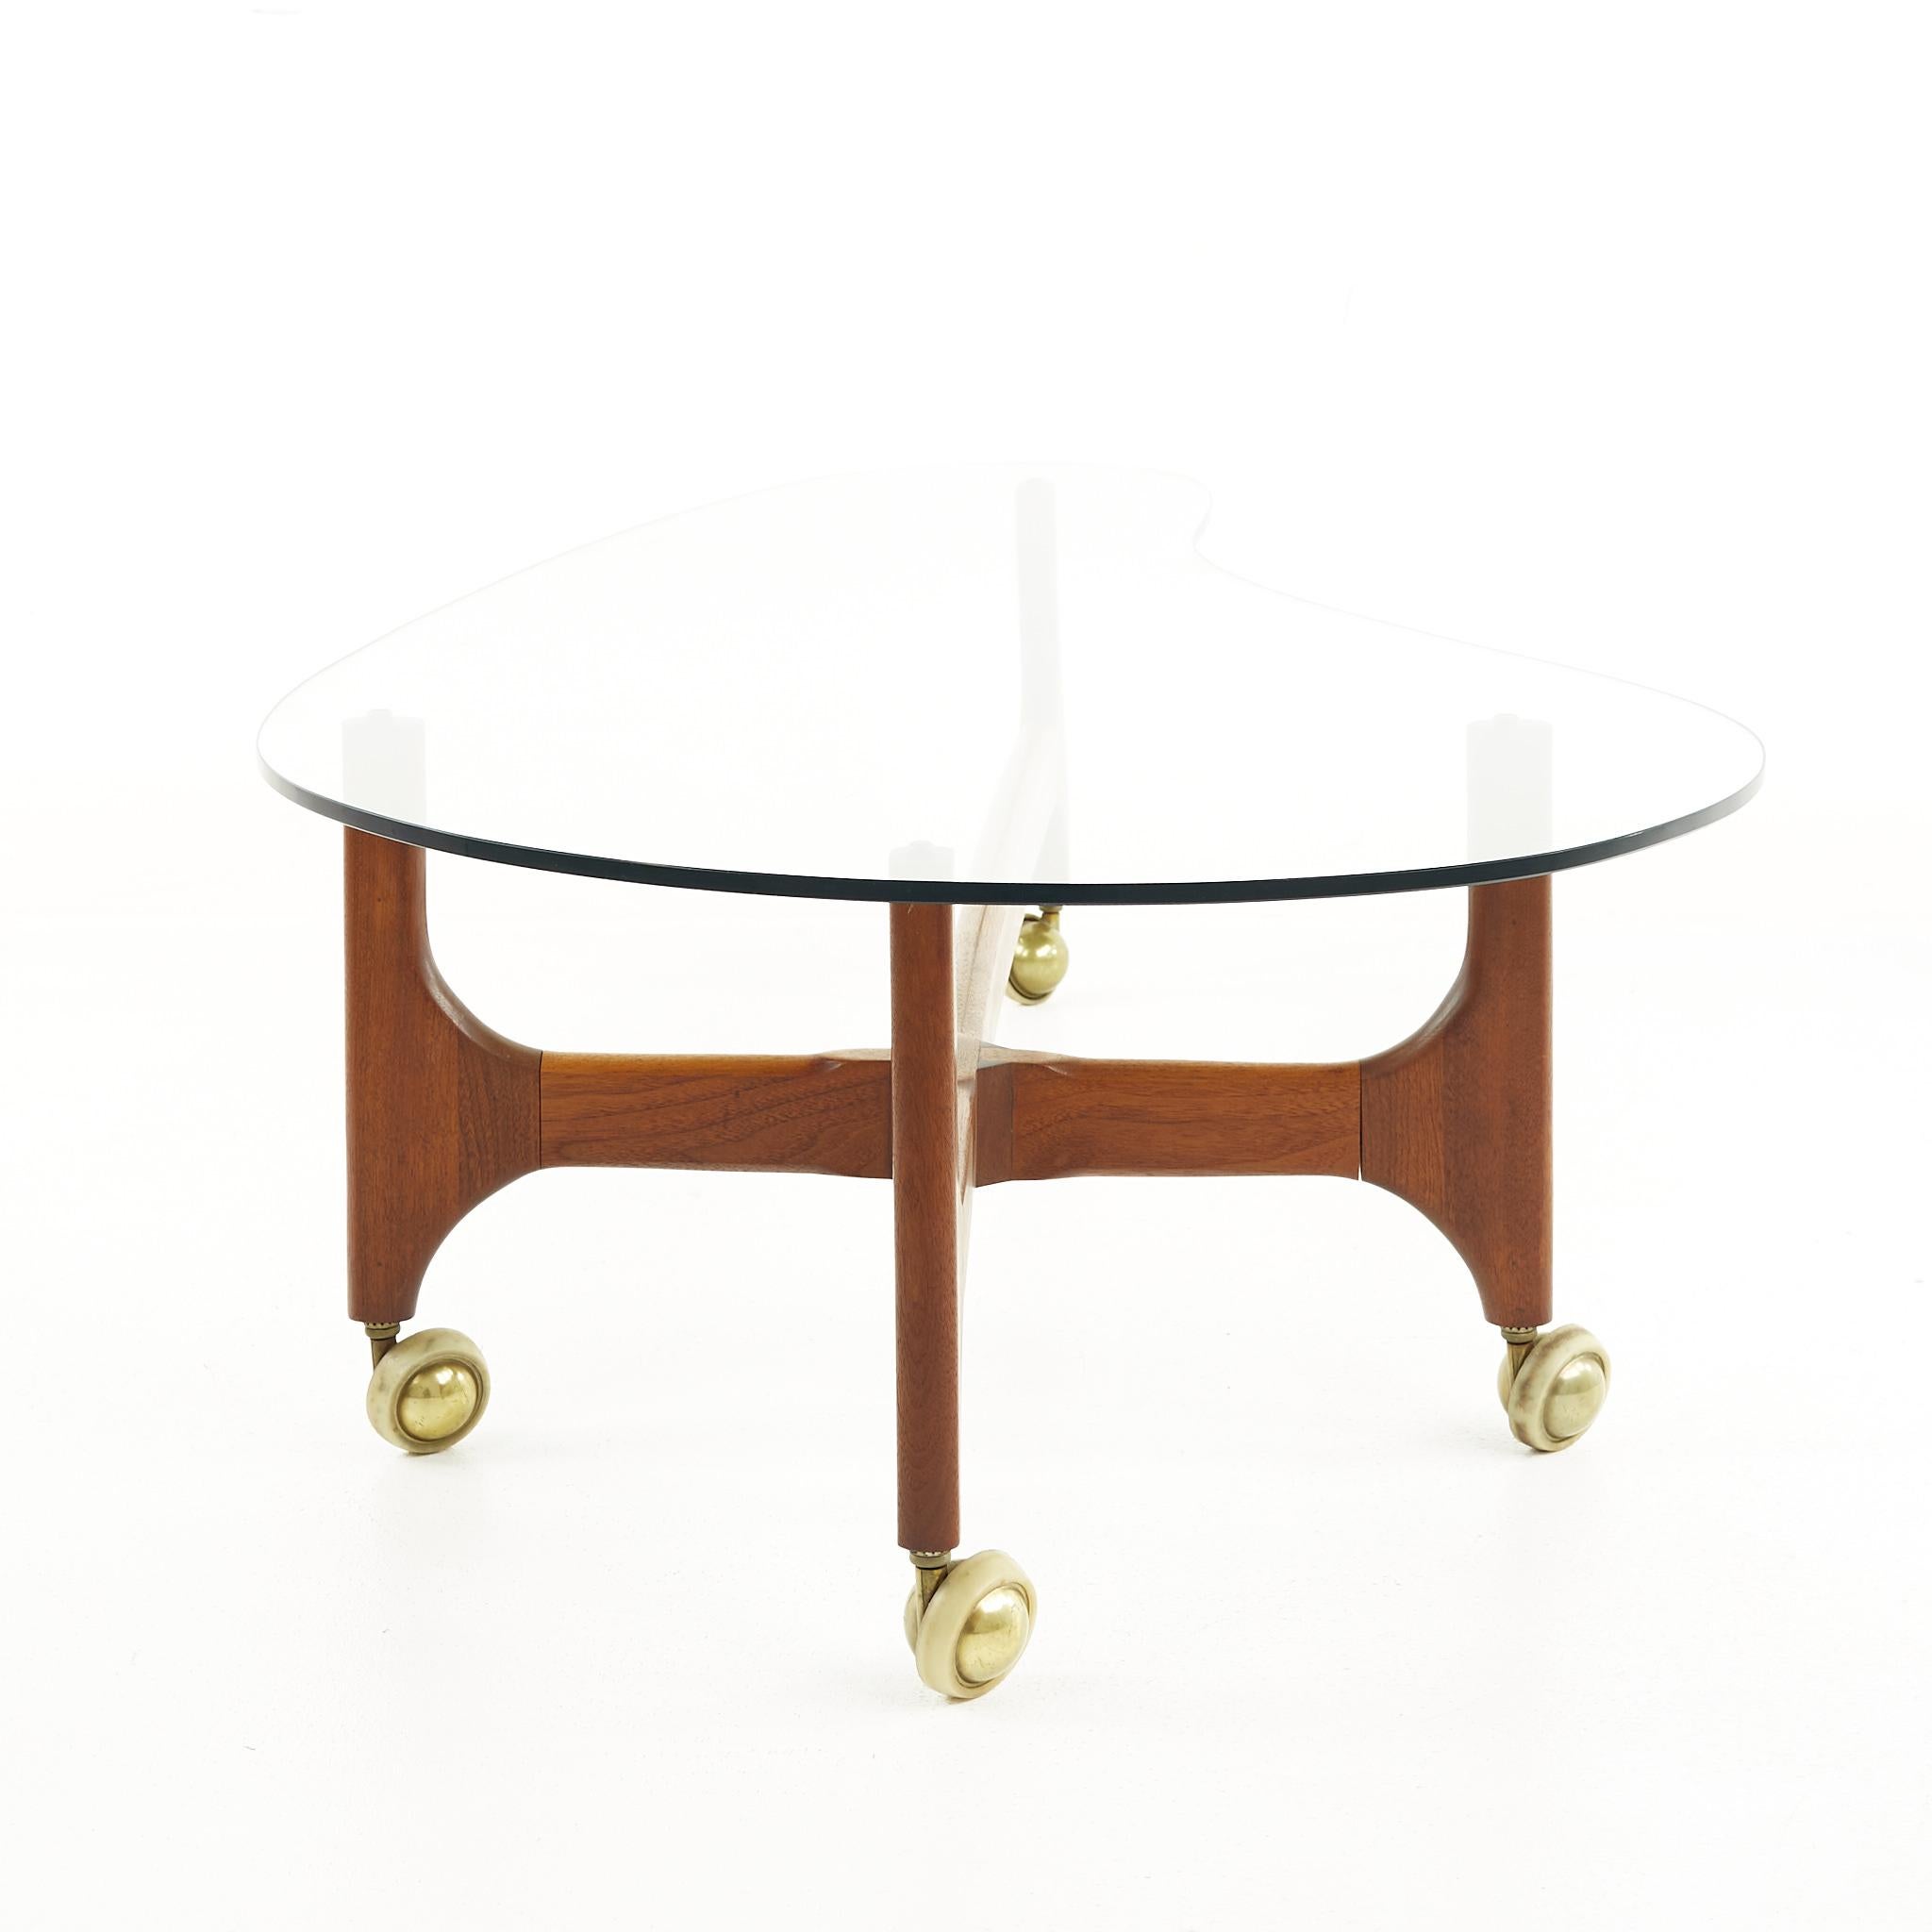 American Adrian Pearsall Style Mid Century Walnut and Brass Biomorphic Coffee Table